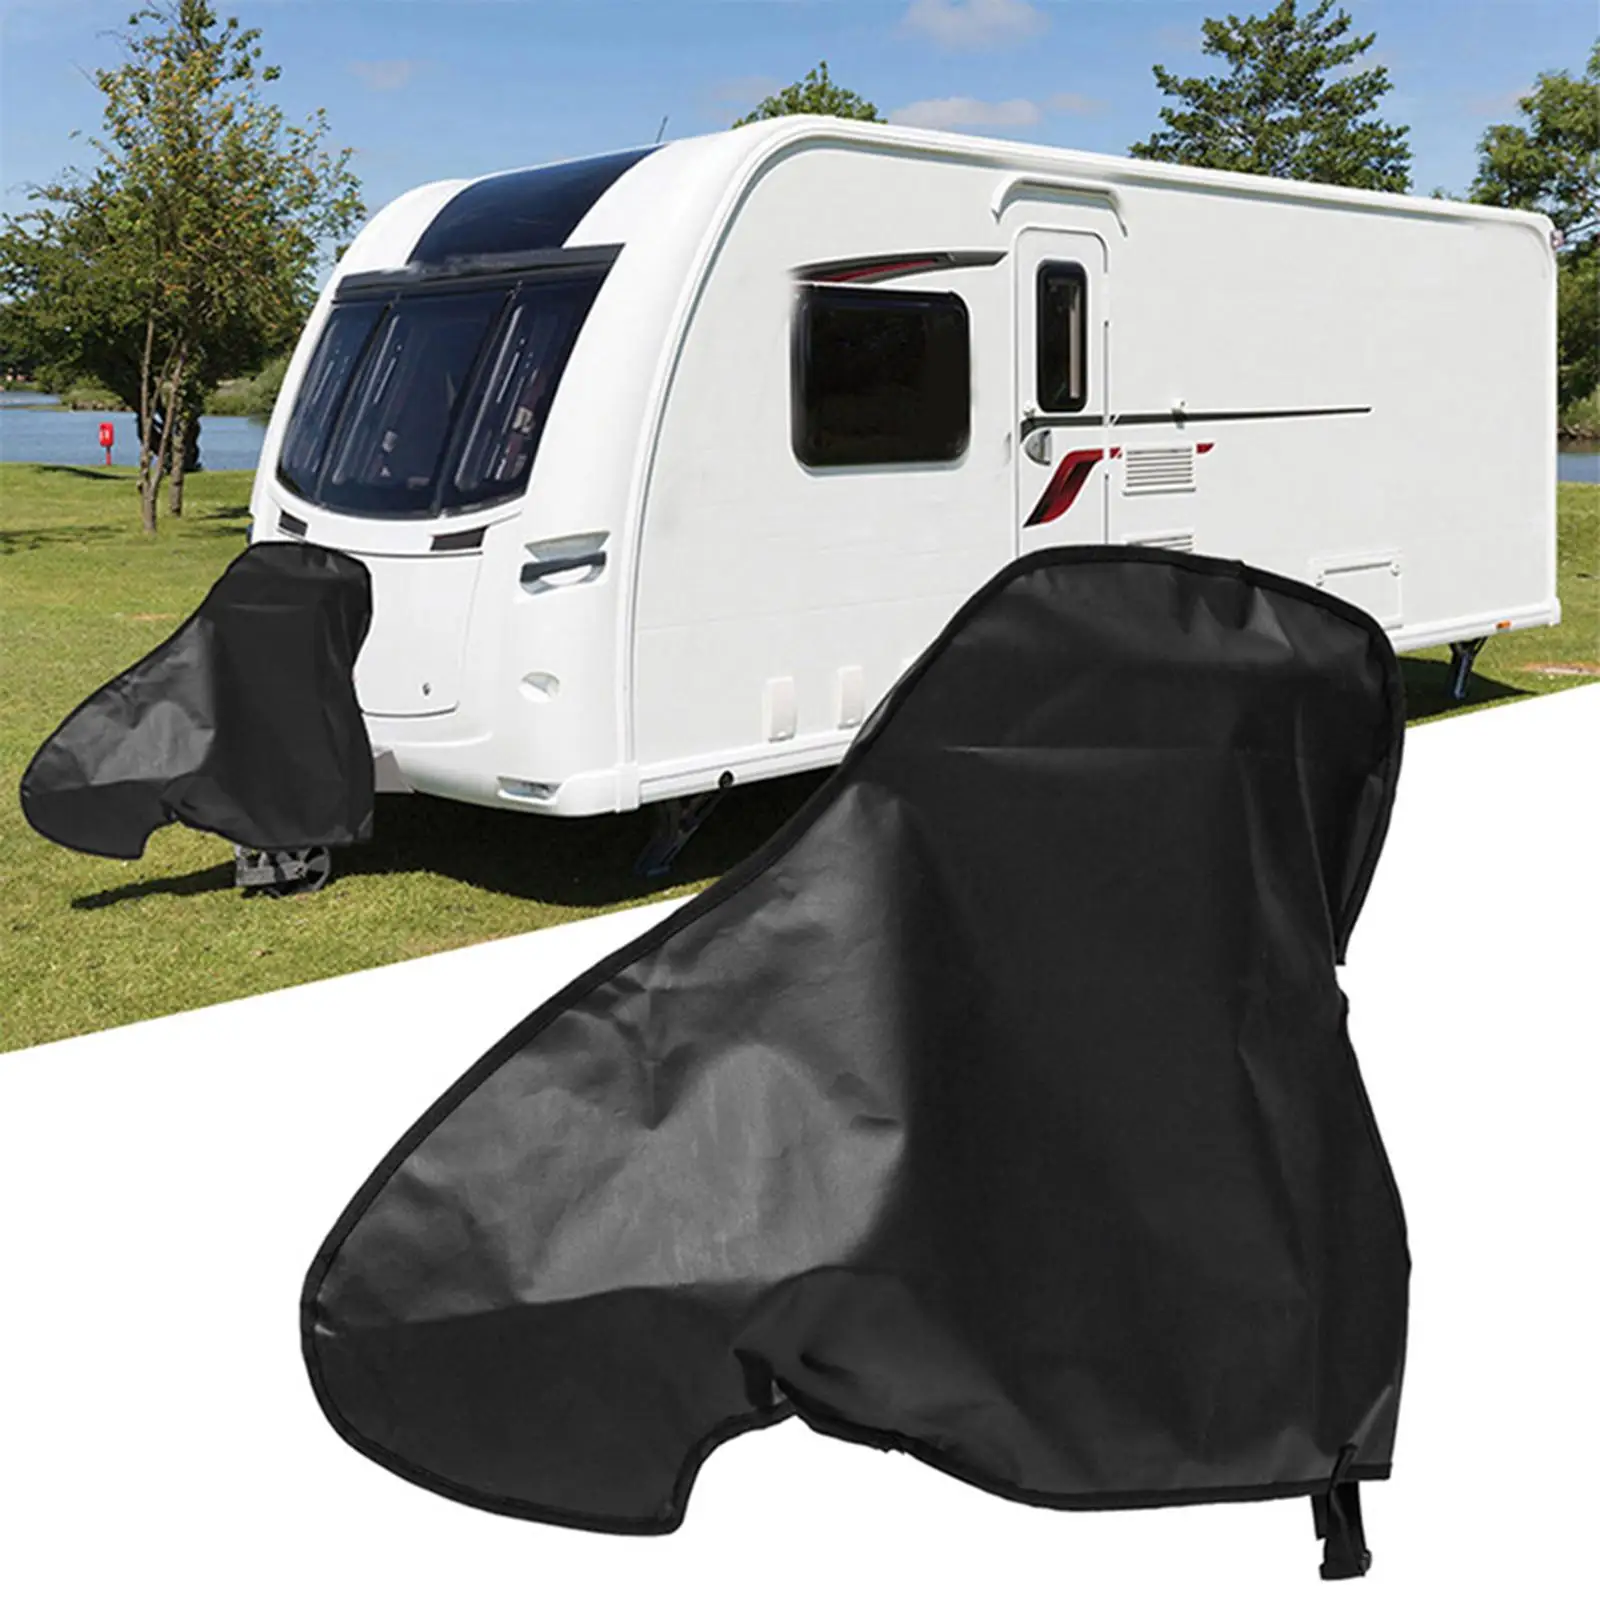 Camper Caravan Hitch Cover Waterproof Dust Proof, Hitch Ball Cover Coupling Rain Snow Protector Easy to Use Elastic Sewing